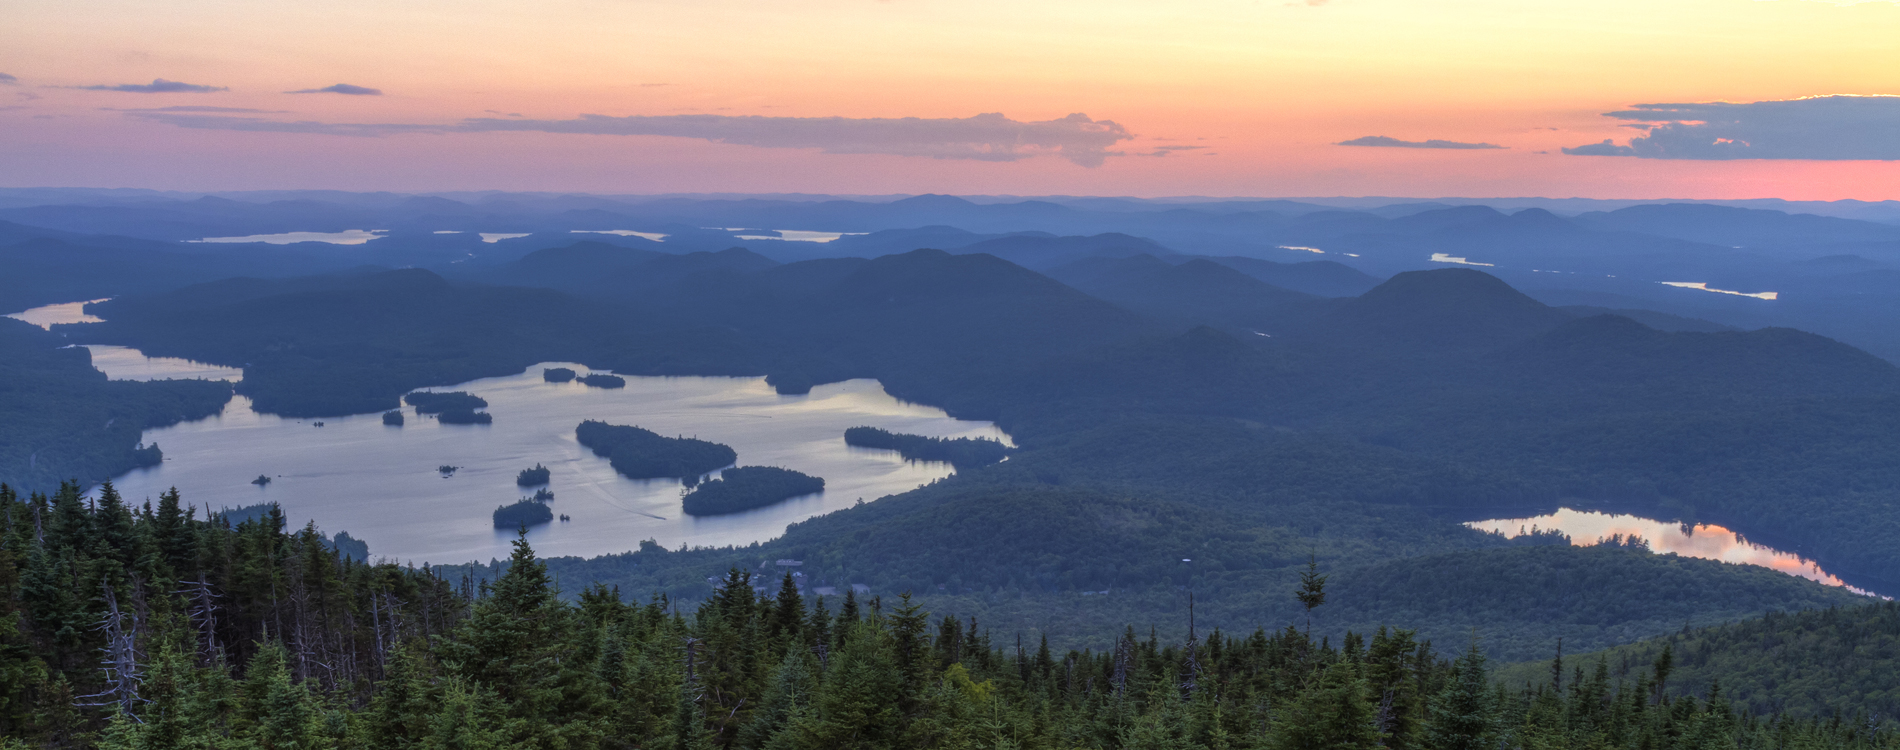 Adirondacks - View from Blue Mountain Fire Tower